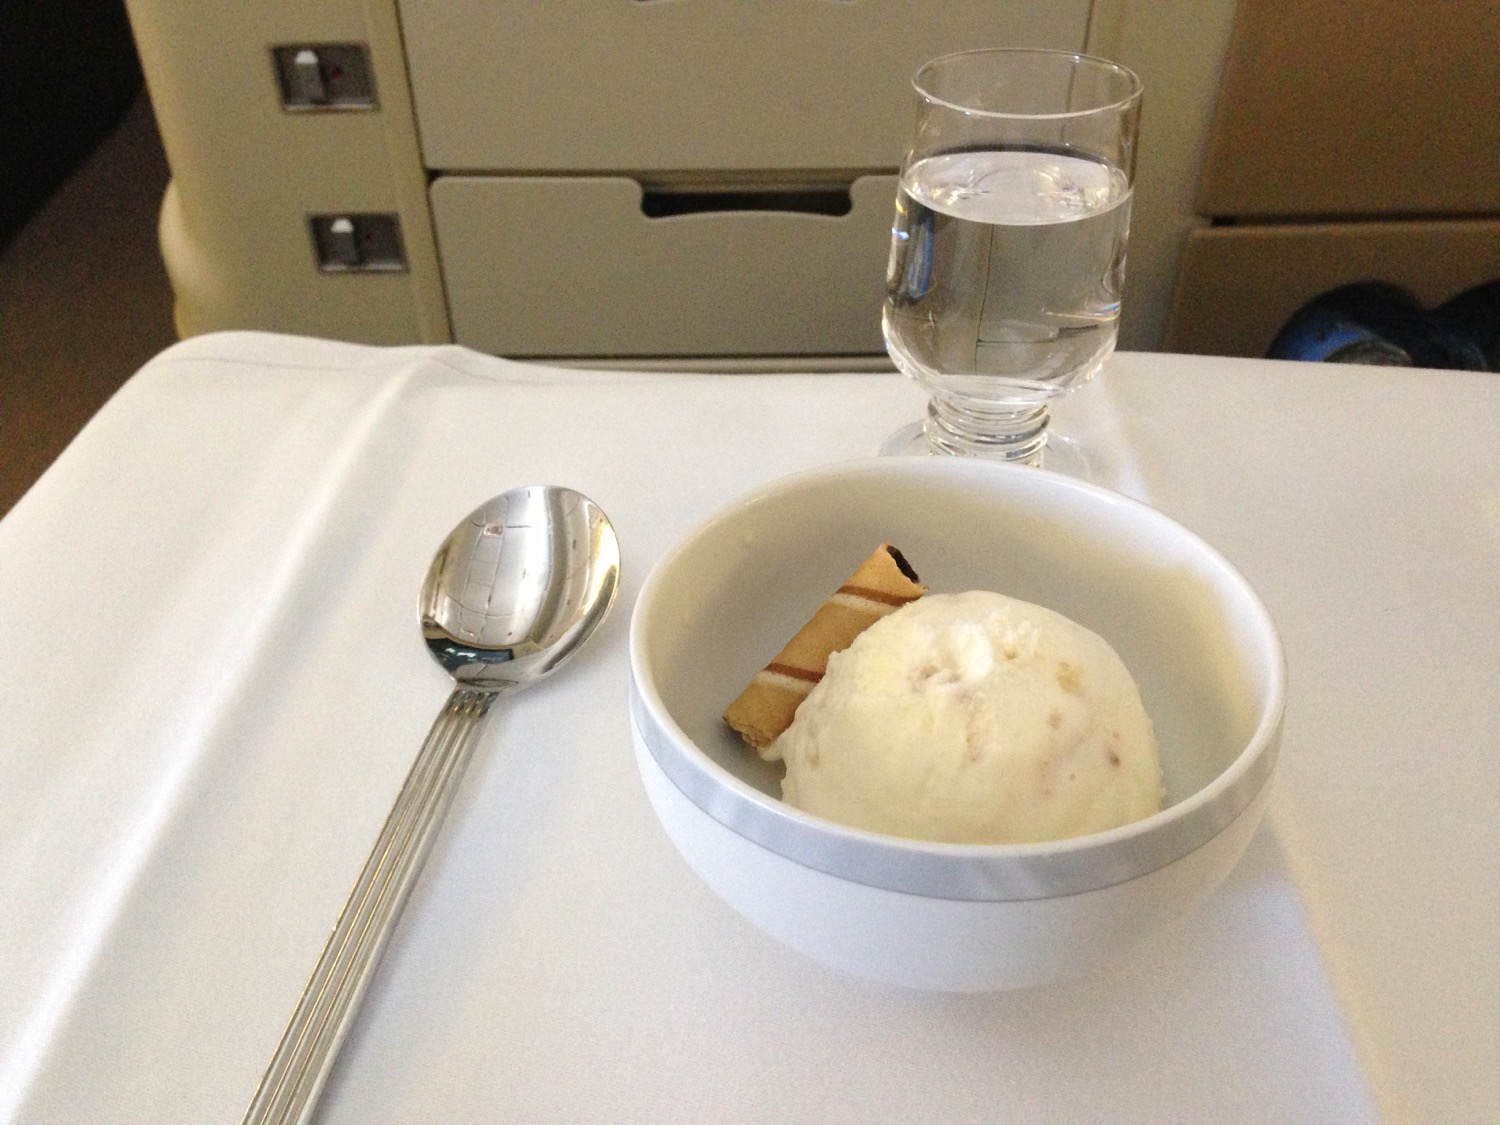 a bowl of ice cream and a glass of water